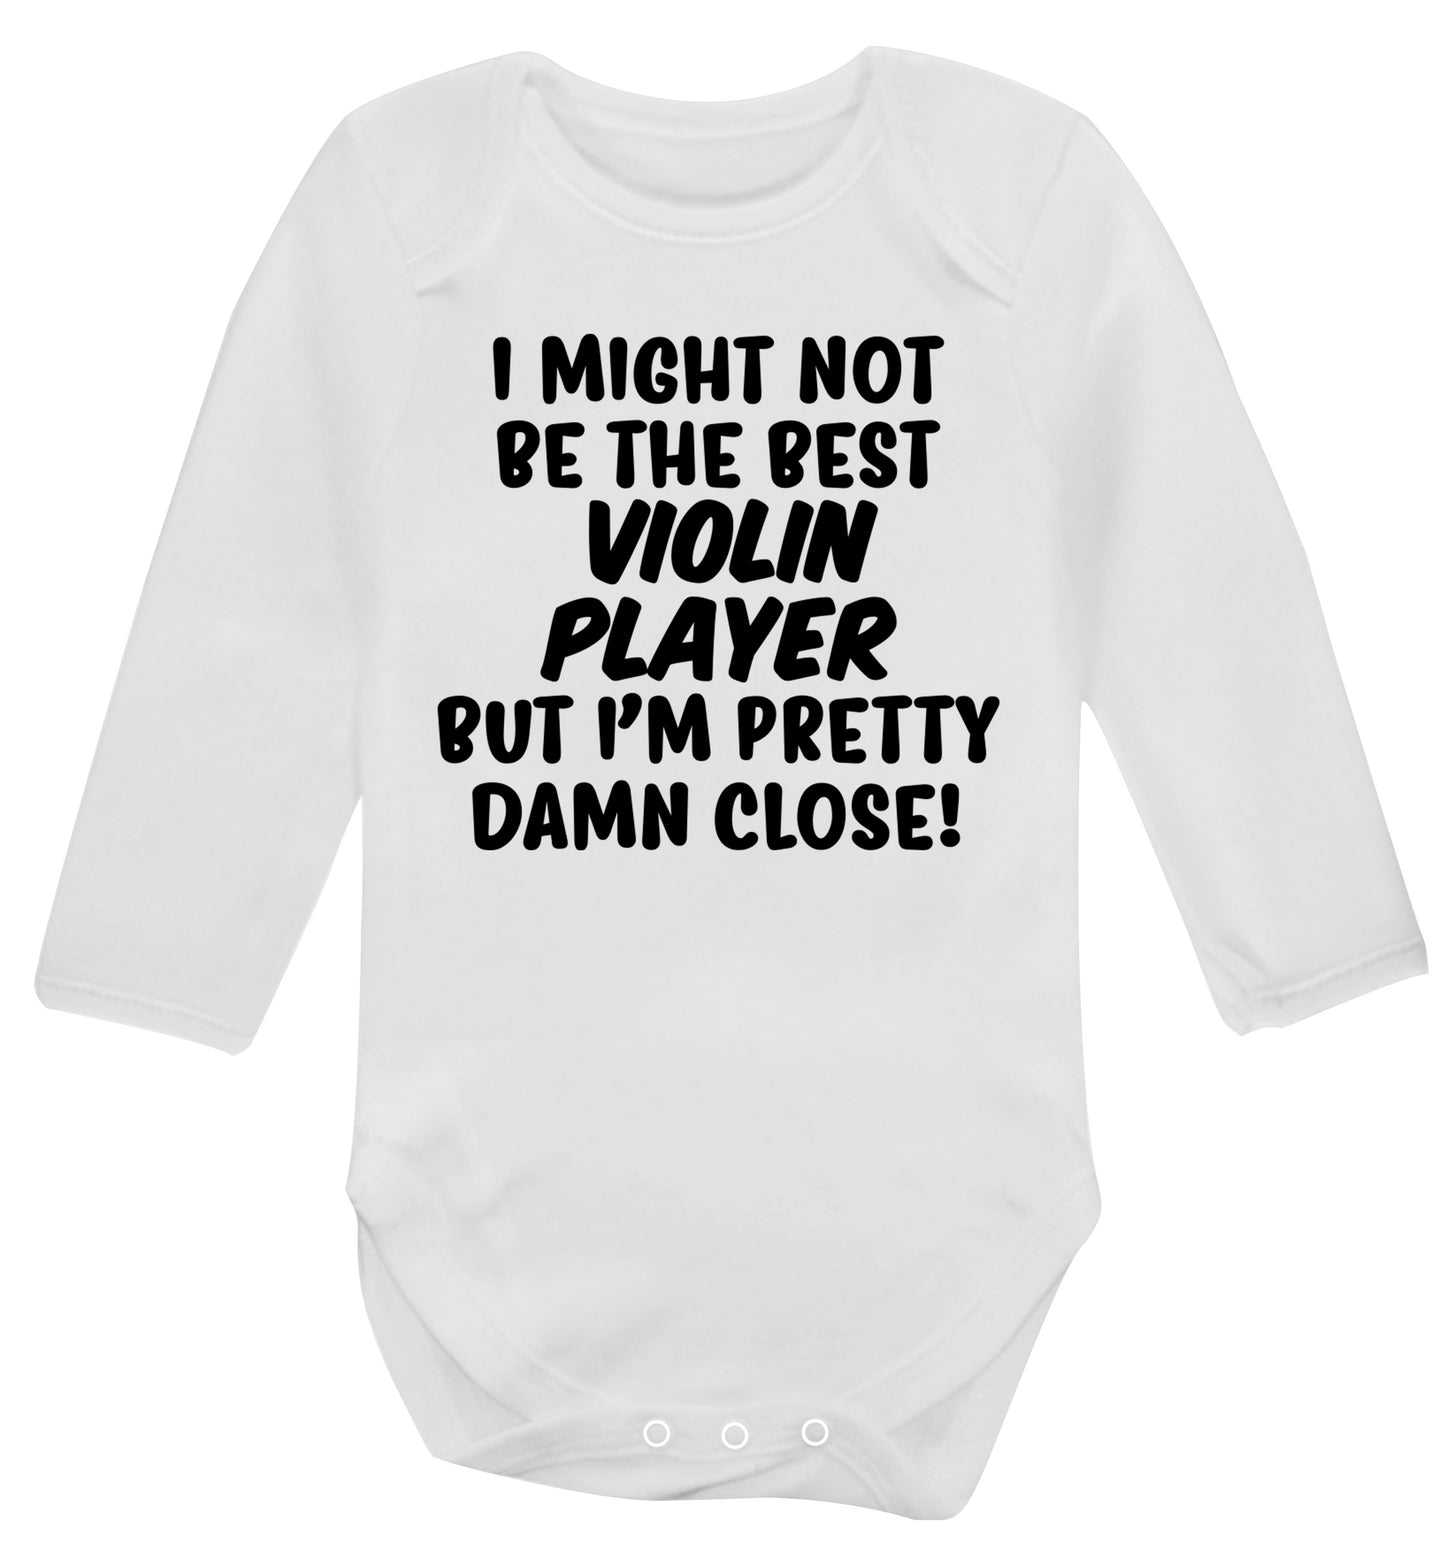 I might not be the best violin player but I'm pretty close Baby Vest long sleeved white 6-12 months